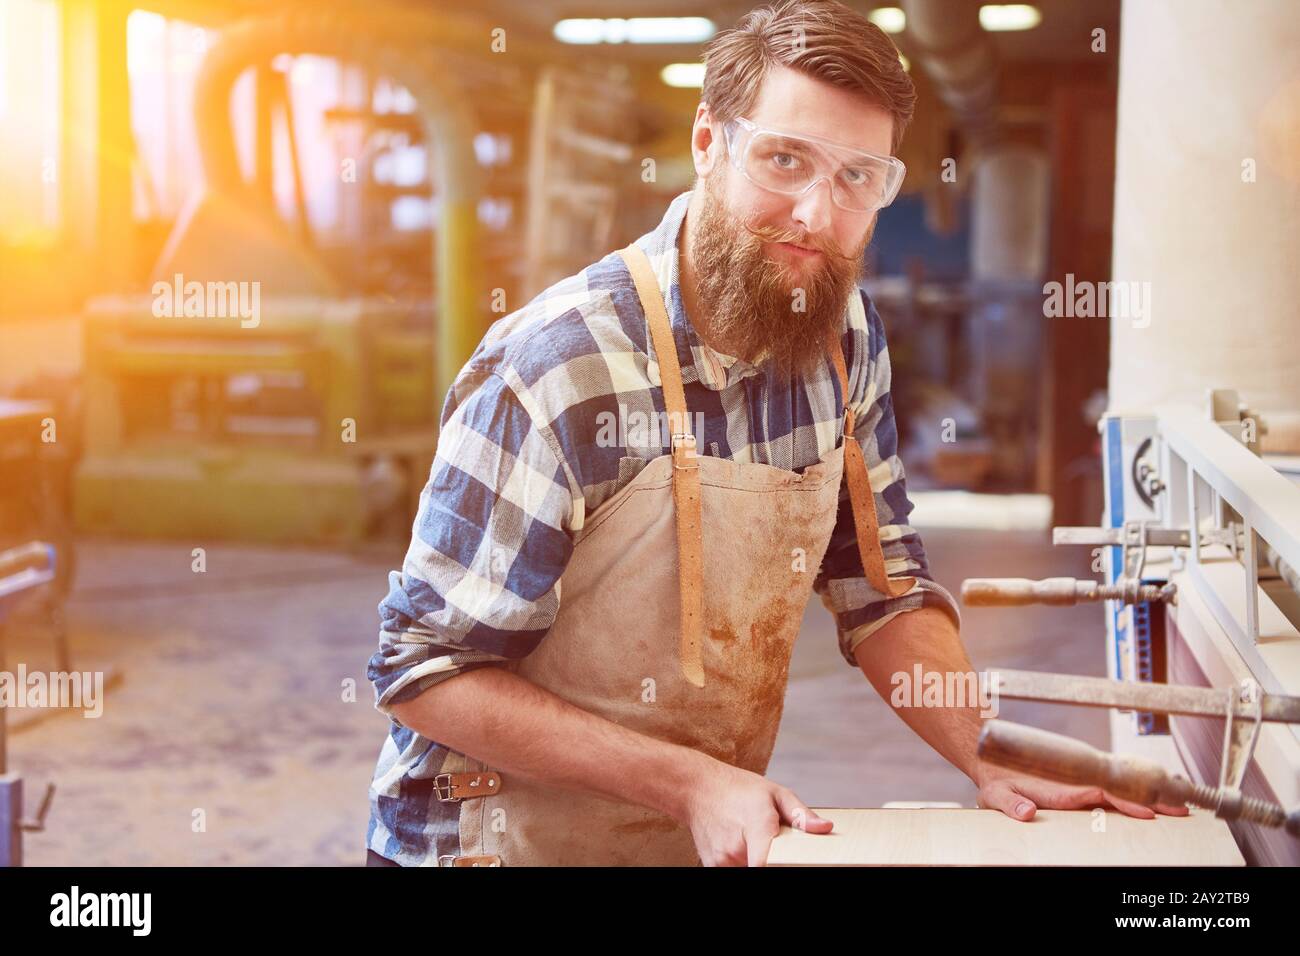 Hipster with a beard is training as a carpenter Stock Photo